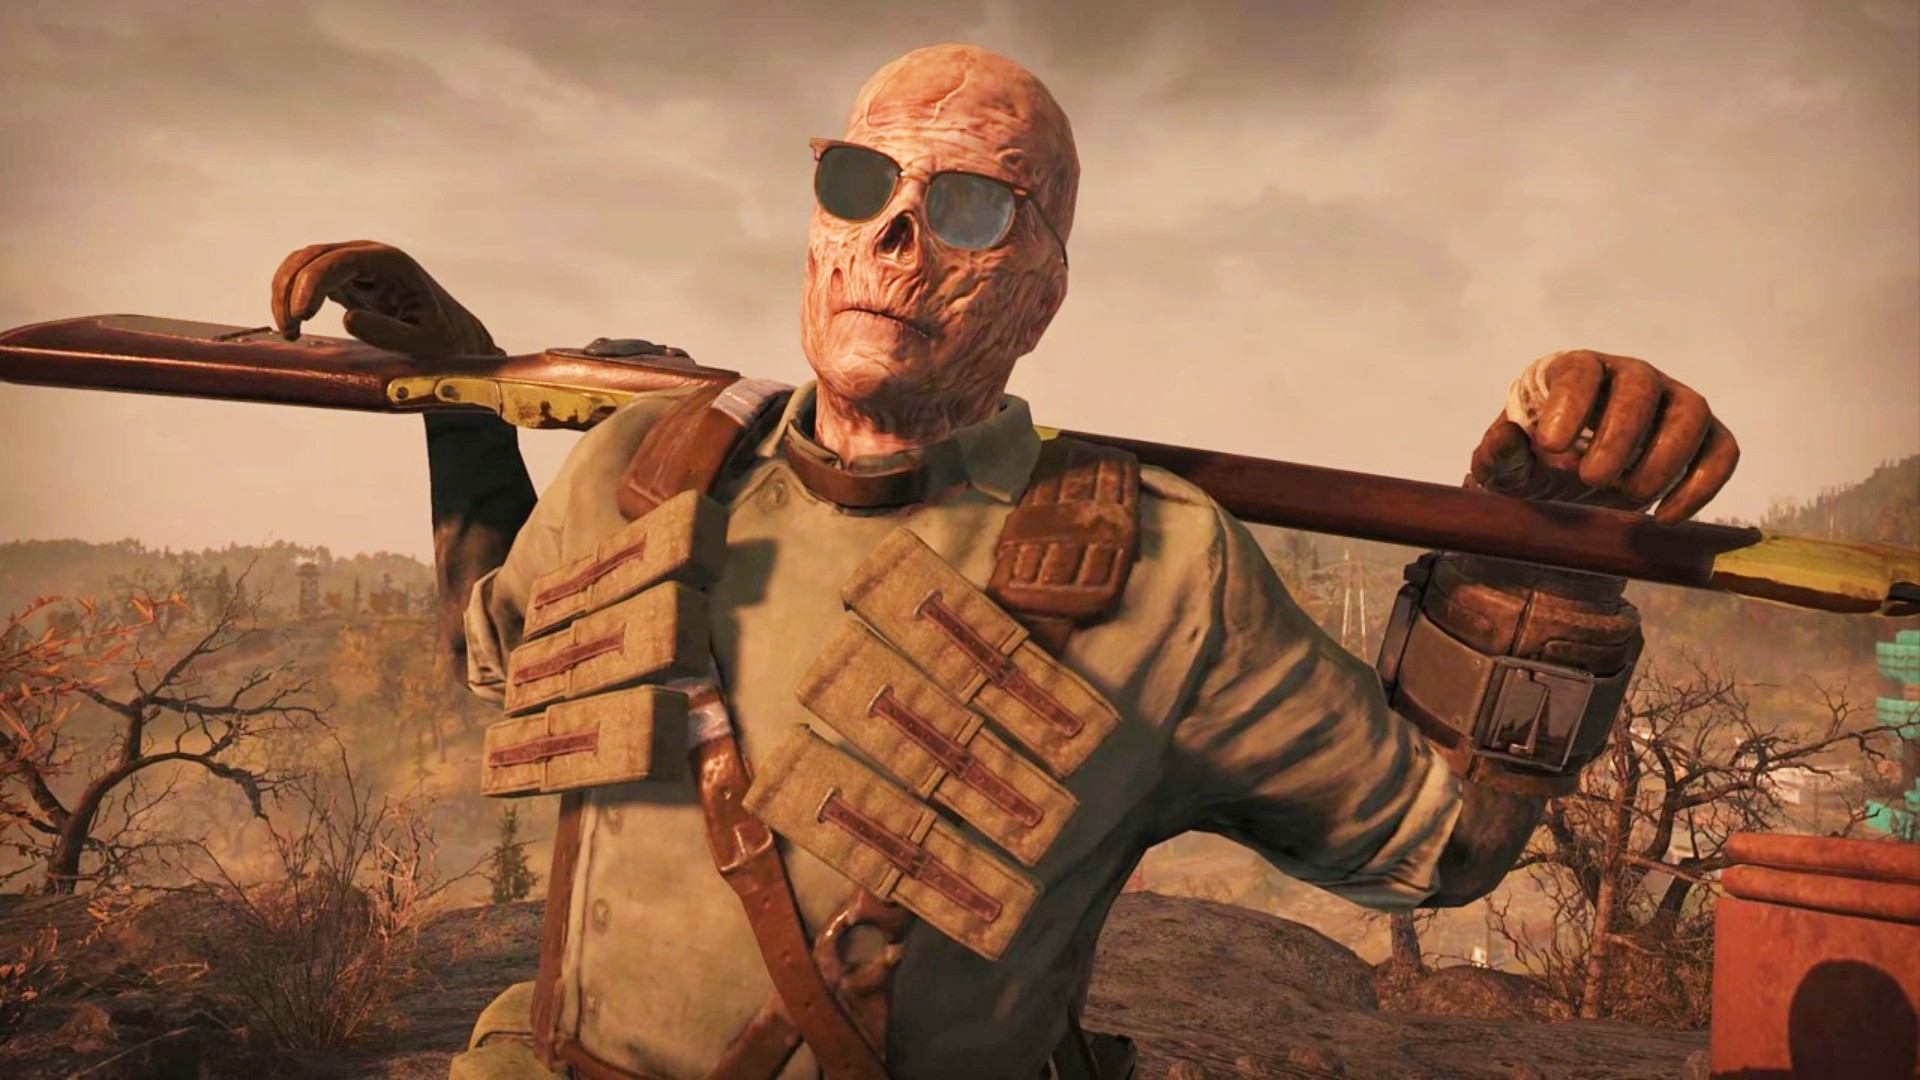 Fallout 76 Ghoul: A playable Ghoul in Fallout 76 holding a rifle